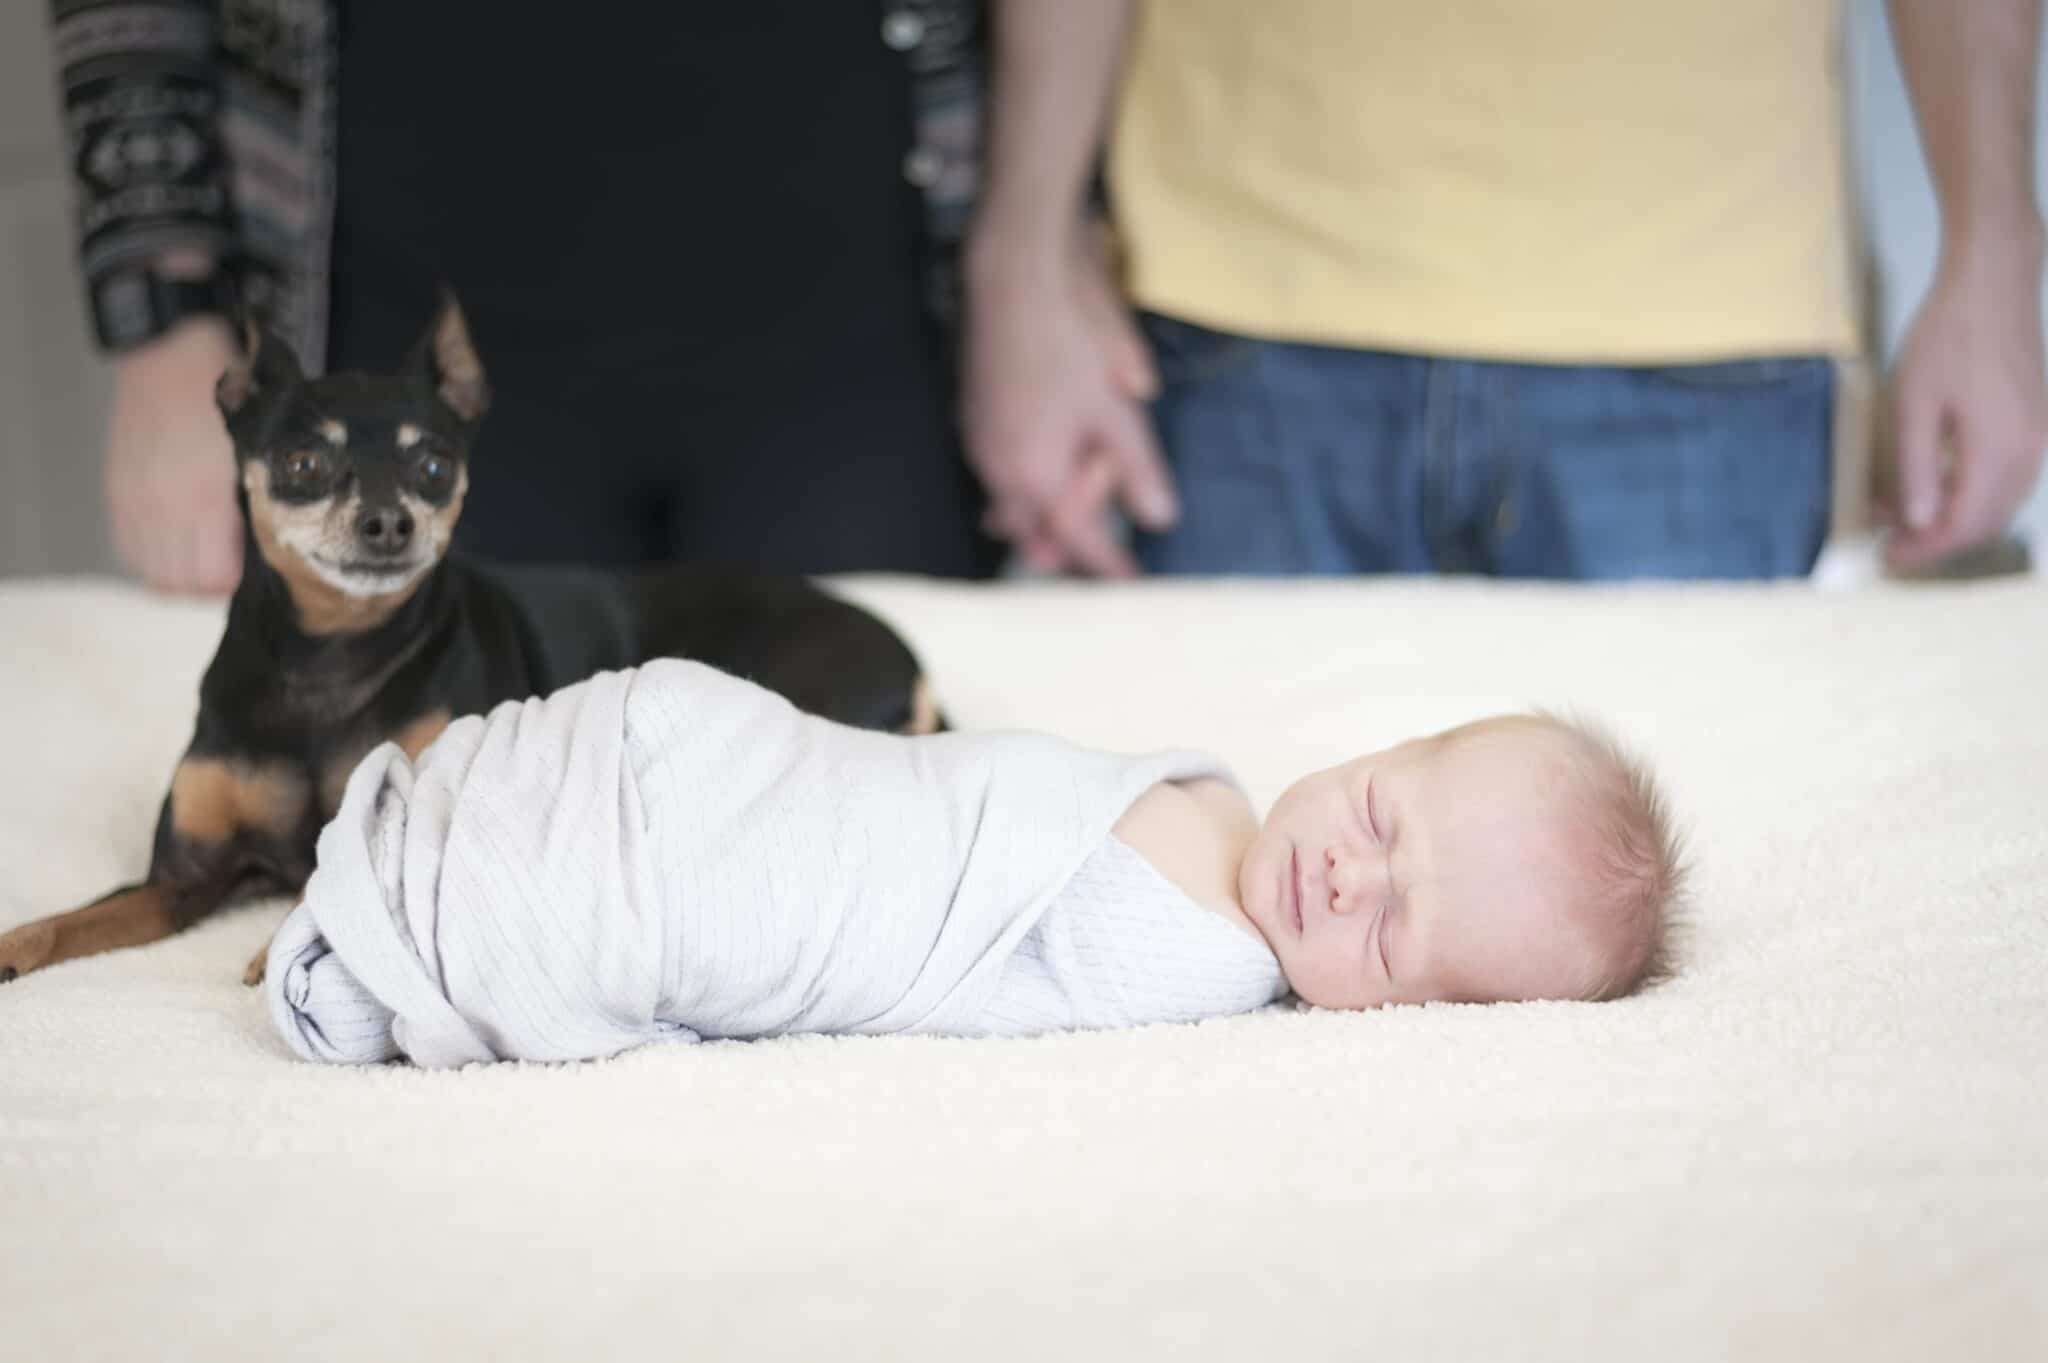 Newborn baby photography with the baby on a king-sized bed with the family puppy, Mom and Dad in the background.